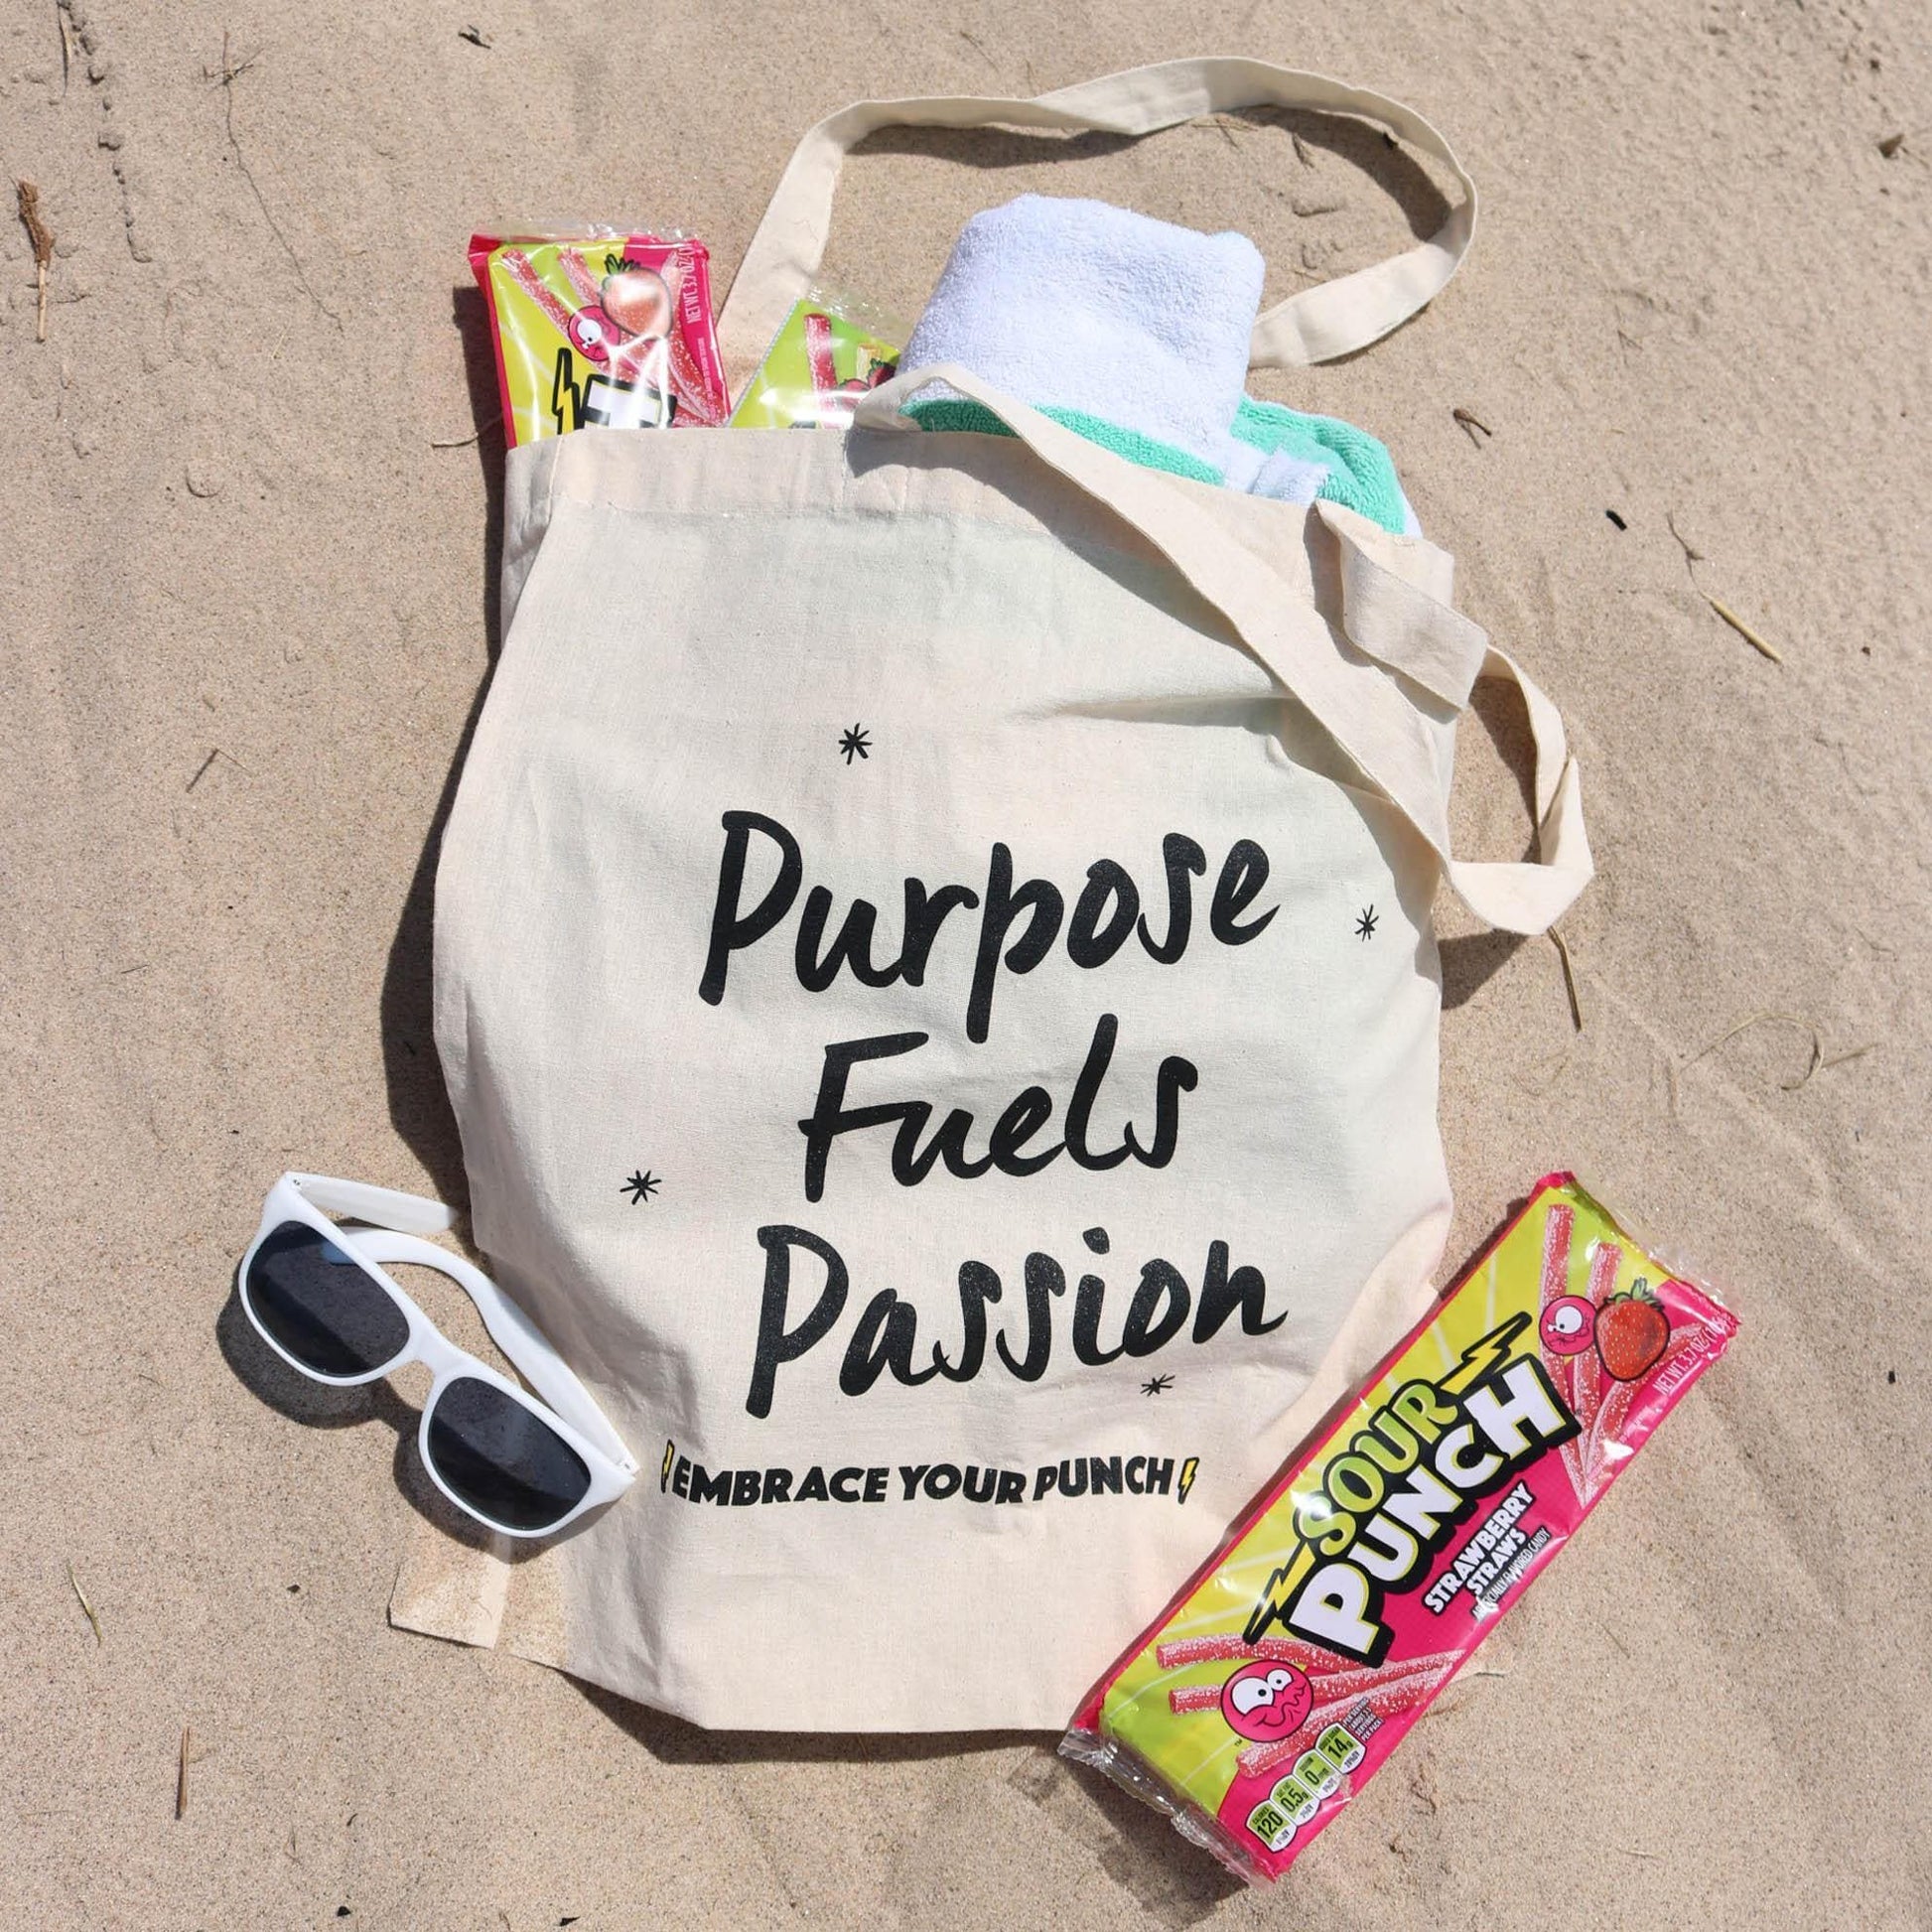 SOUR PUNCH Tote Bag at the beach filled with Sour Punch snacks